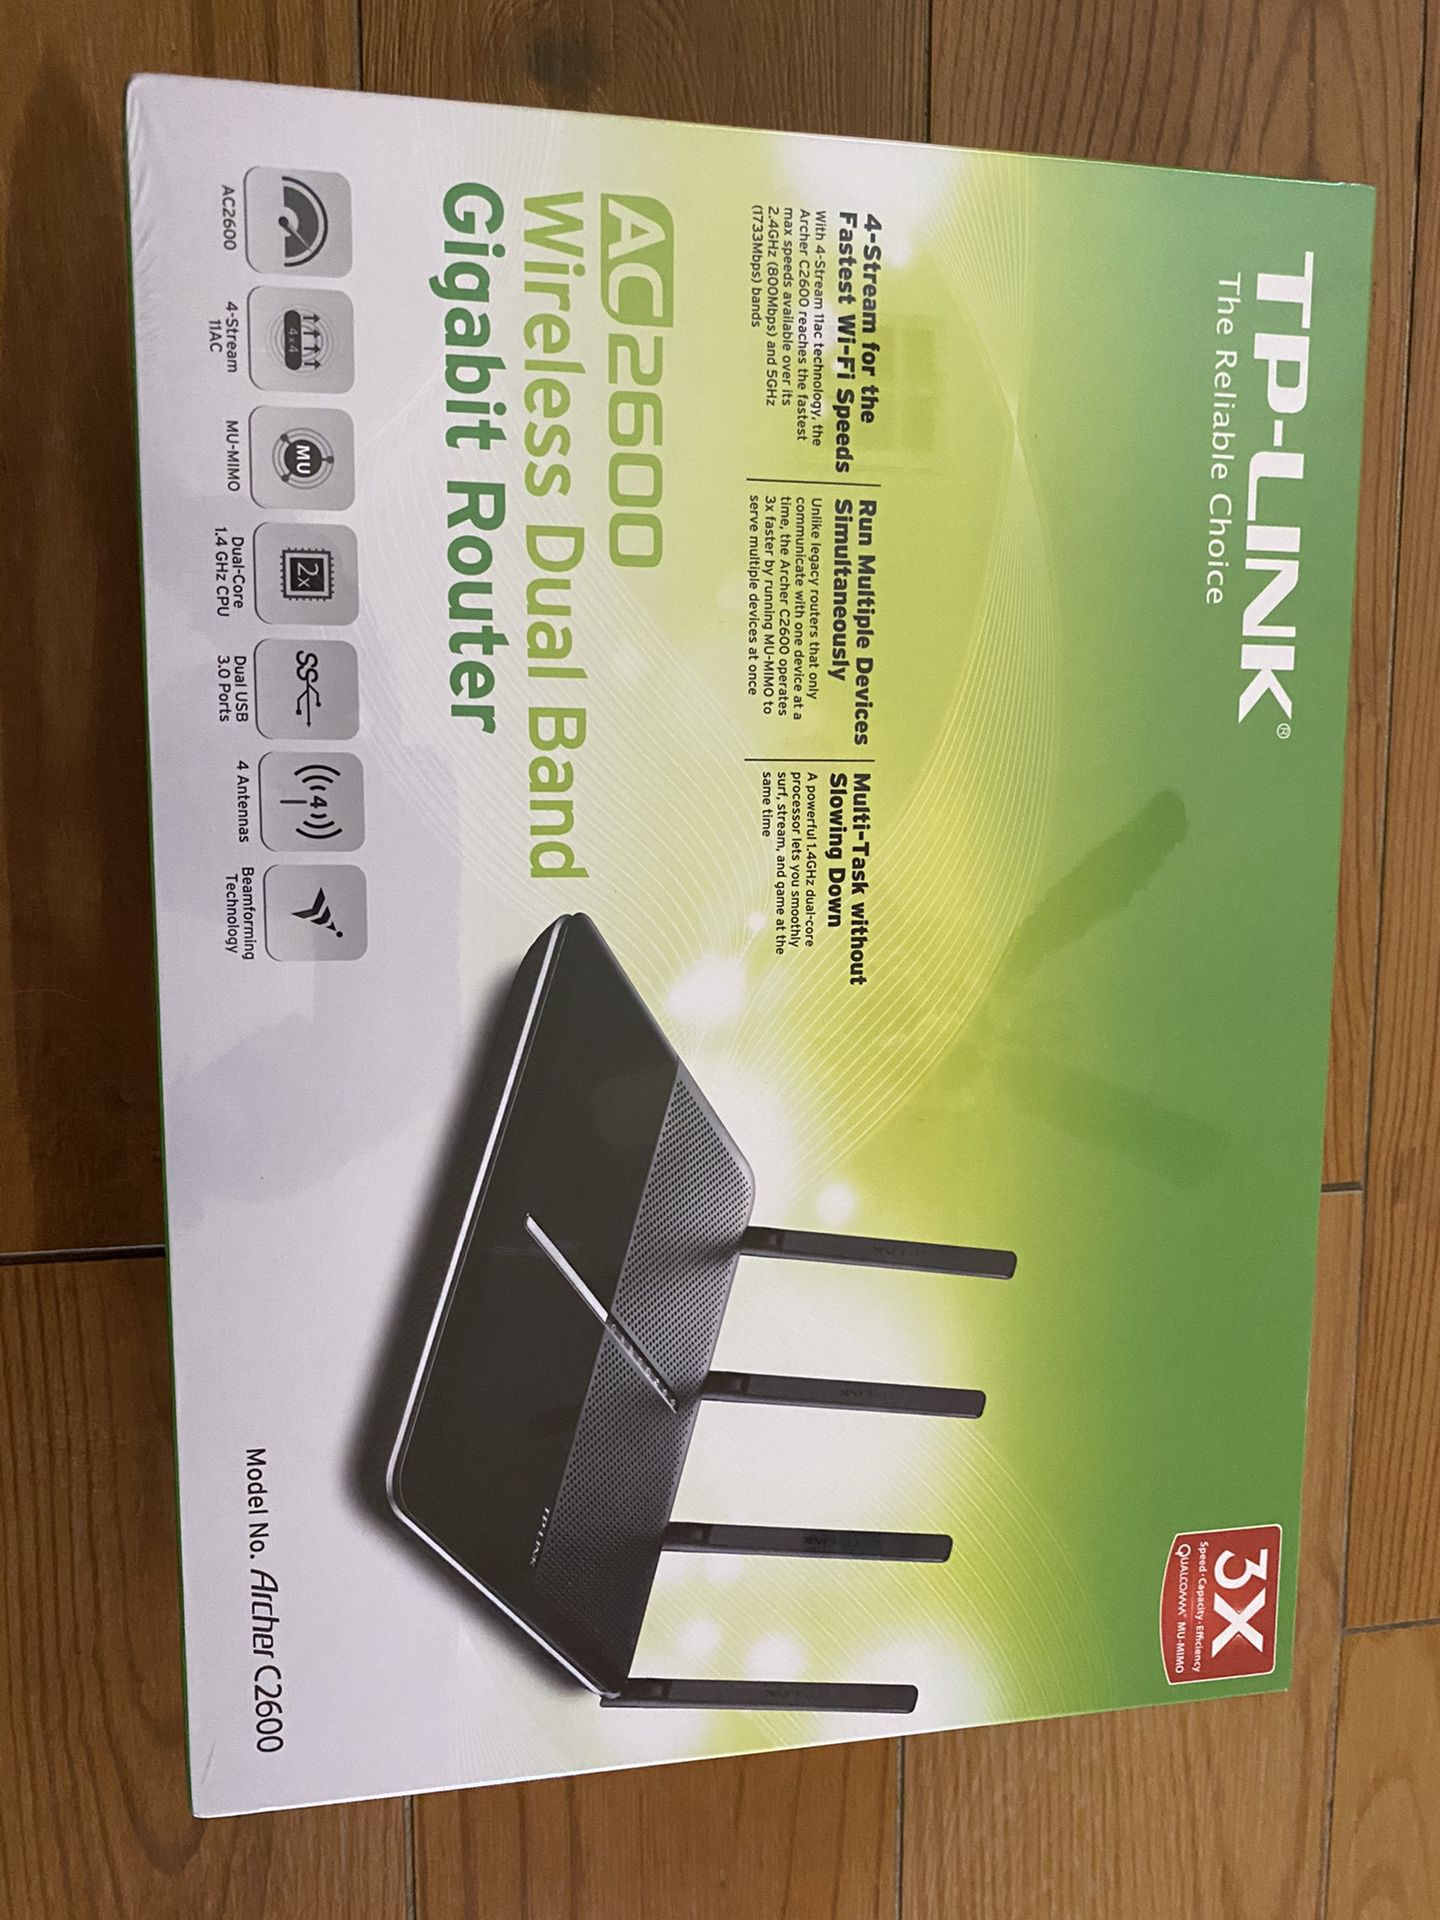 TP Link wireless dual band gigabit router